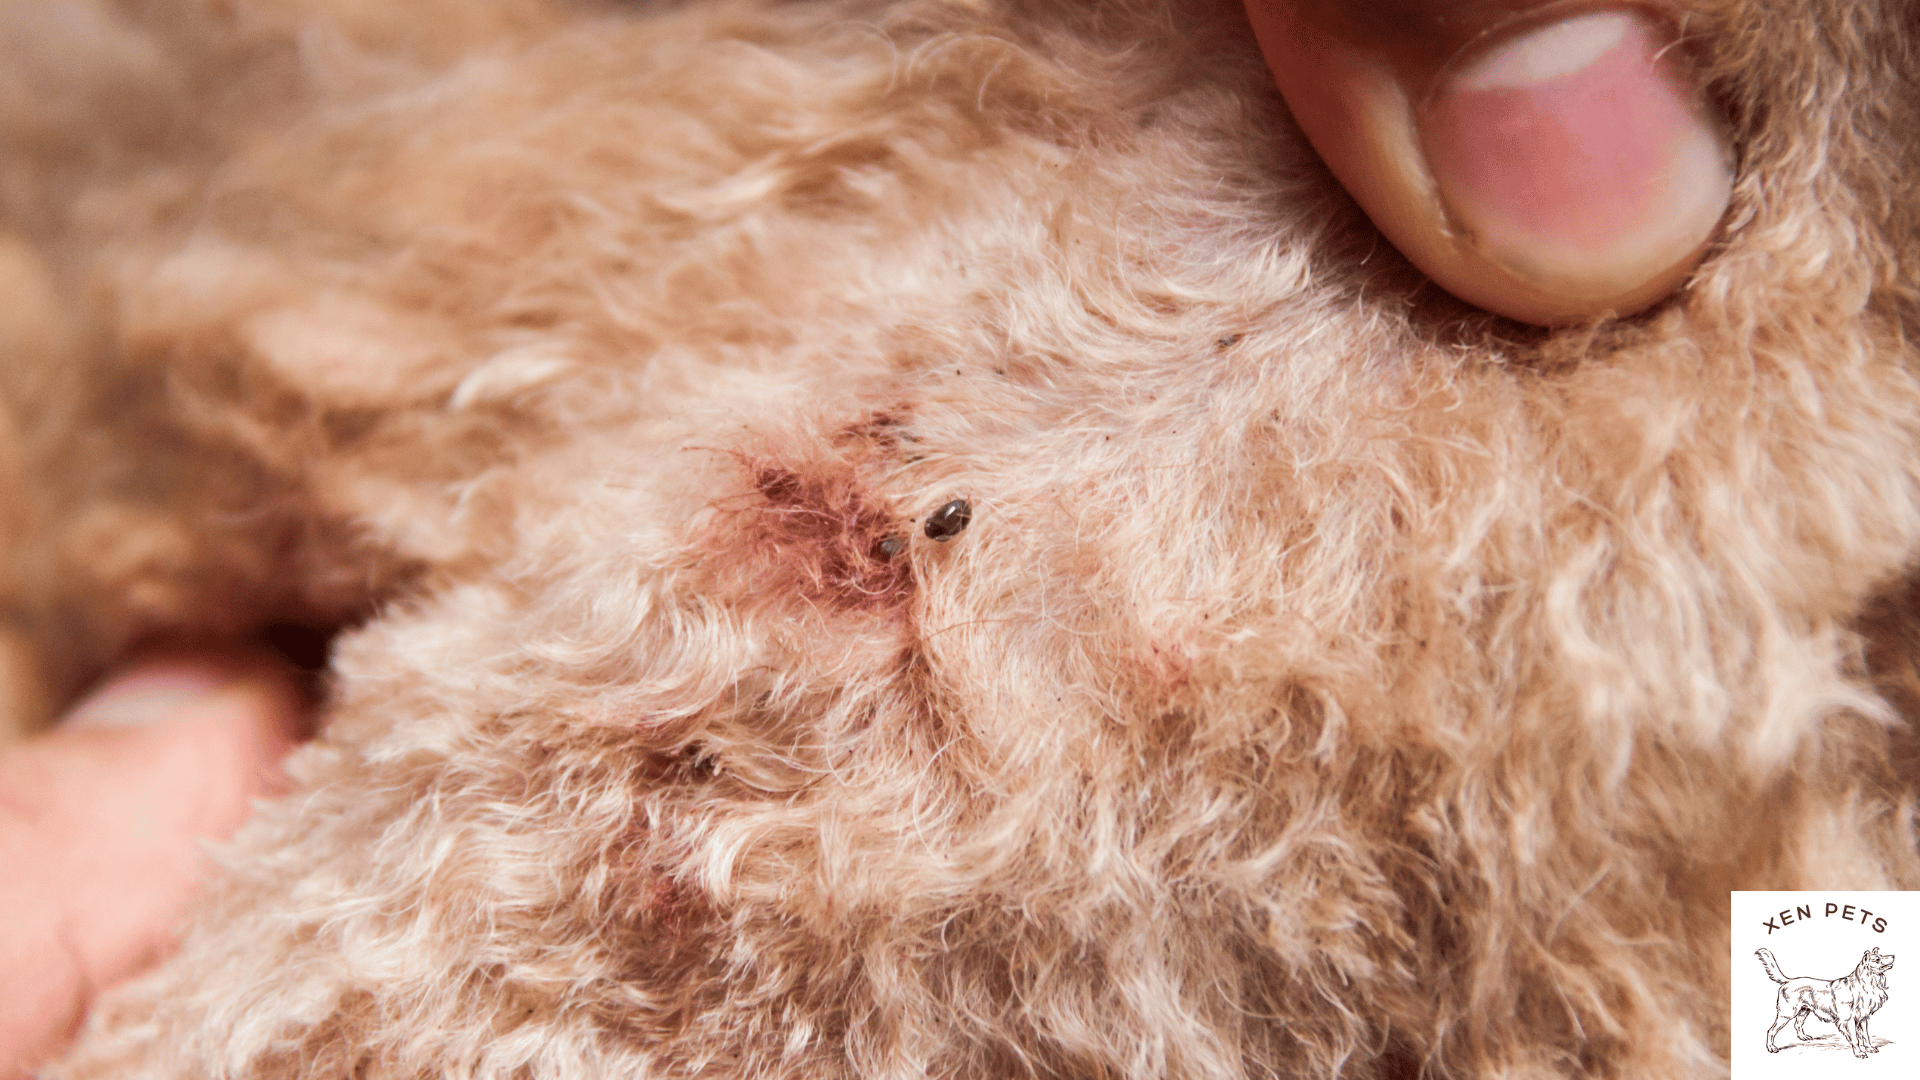 dog with mite and flea infection